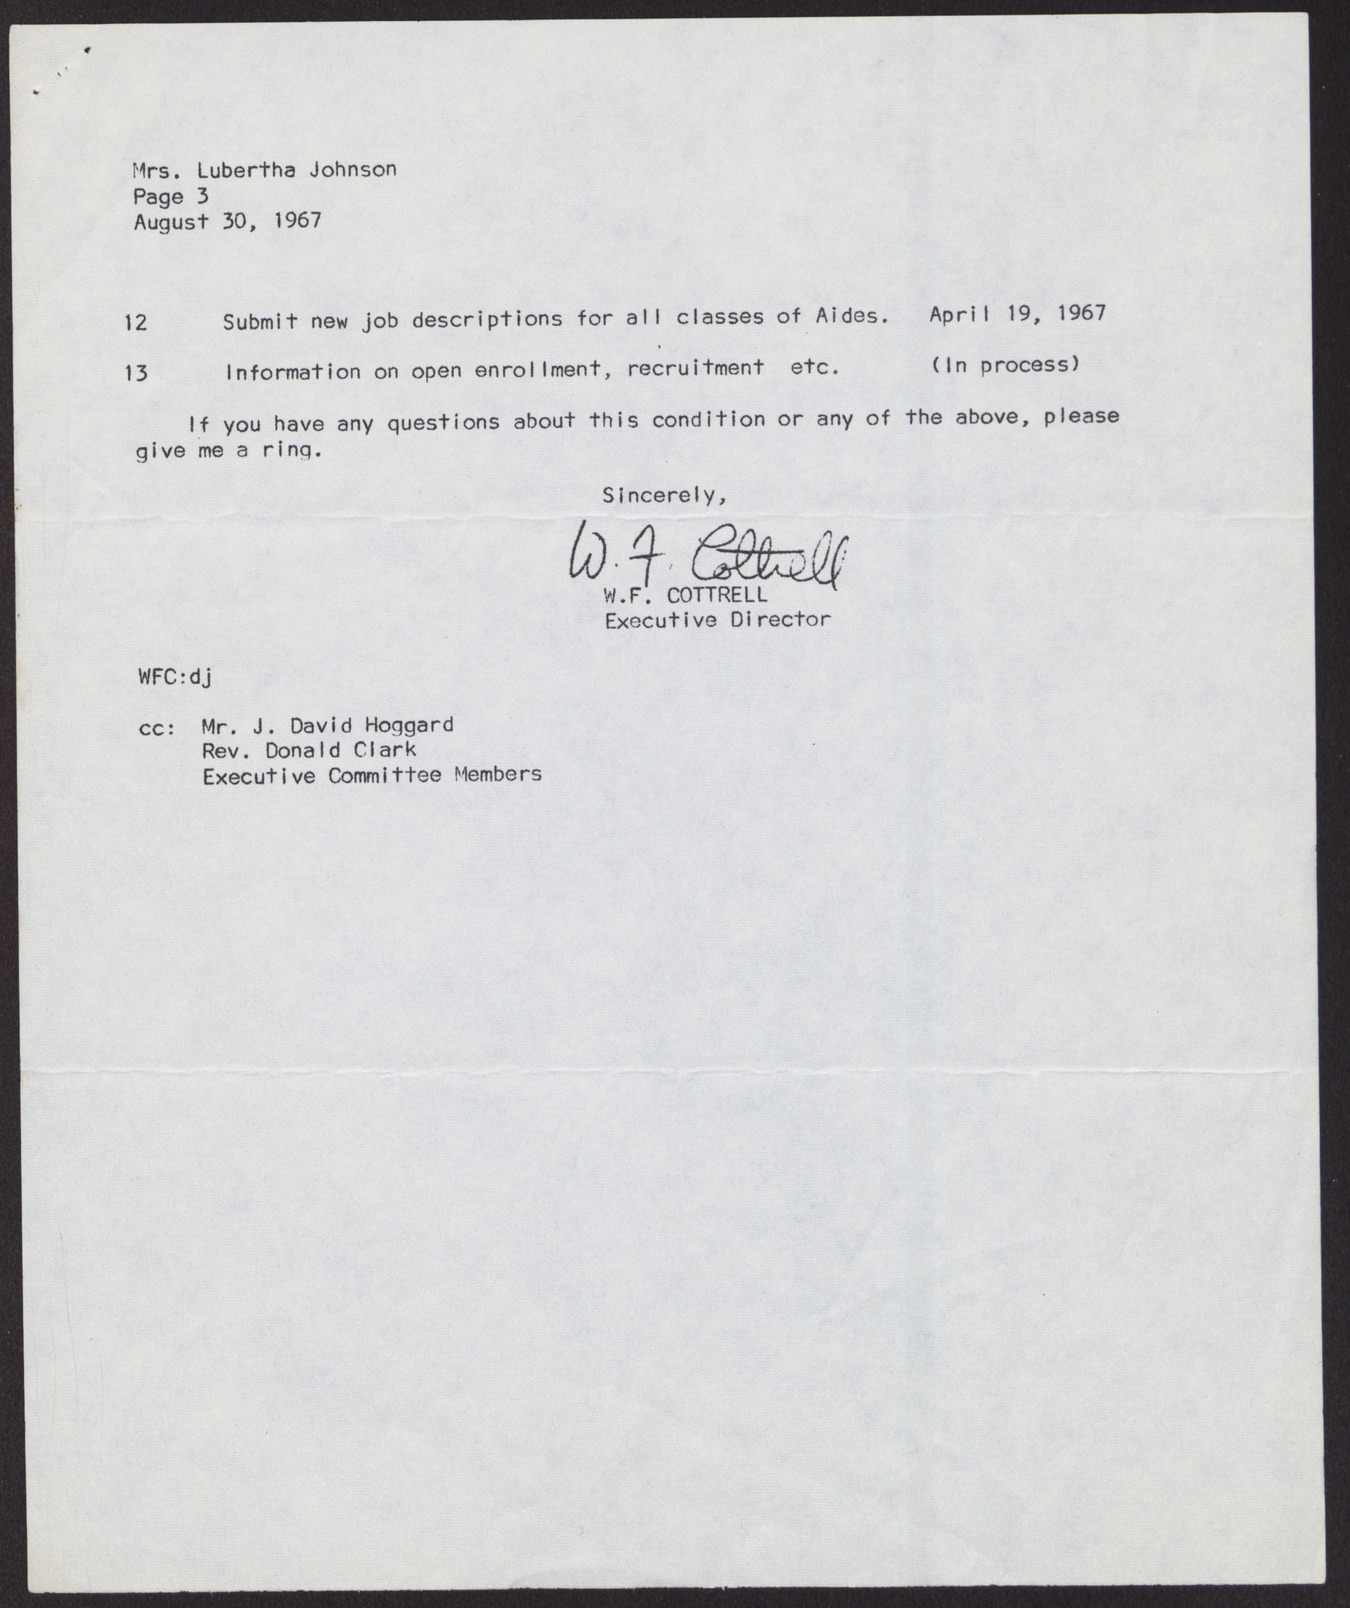 Letter to Mrs. Lubertha M. Johnson from W. F. Cottrell (3 pages), August 30, 1967, page 3